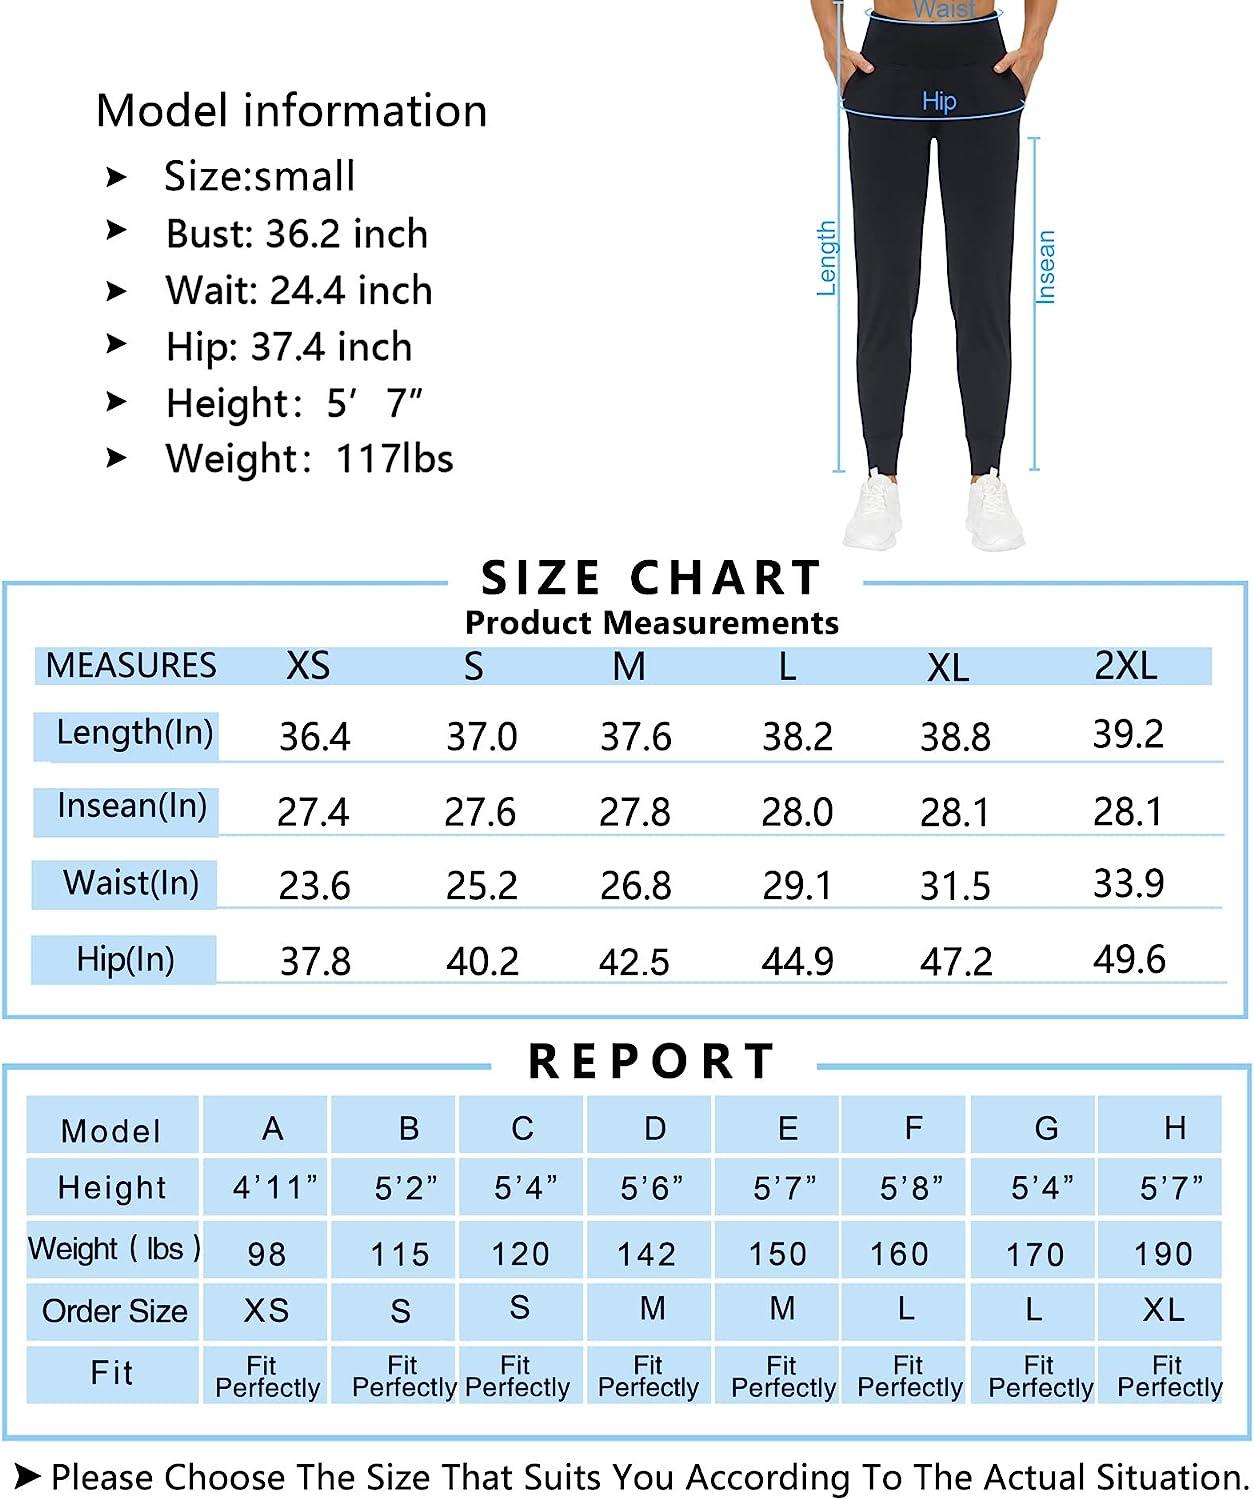 THE GYM PEOPLE Women's Joggers Pants Lightweight Athletic Leggings Tapered  Lounge Pants for Workout, Yoga, Running Medium Black